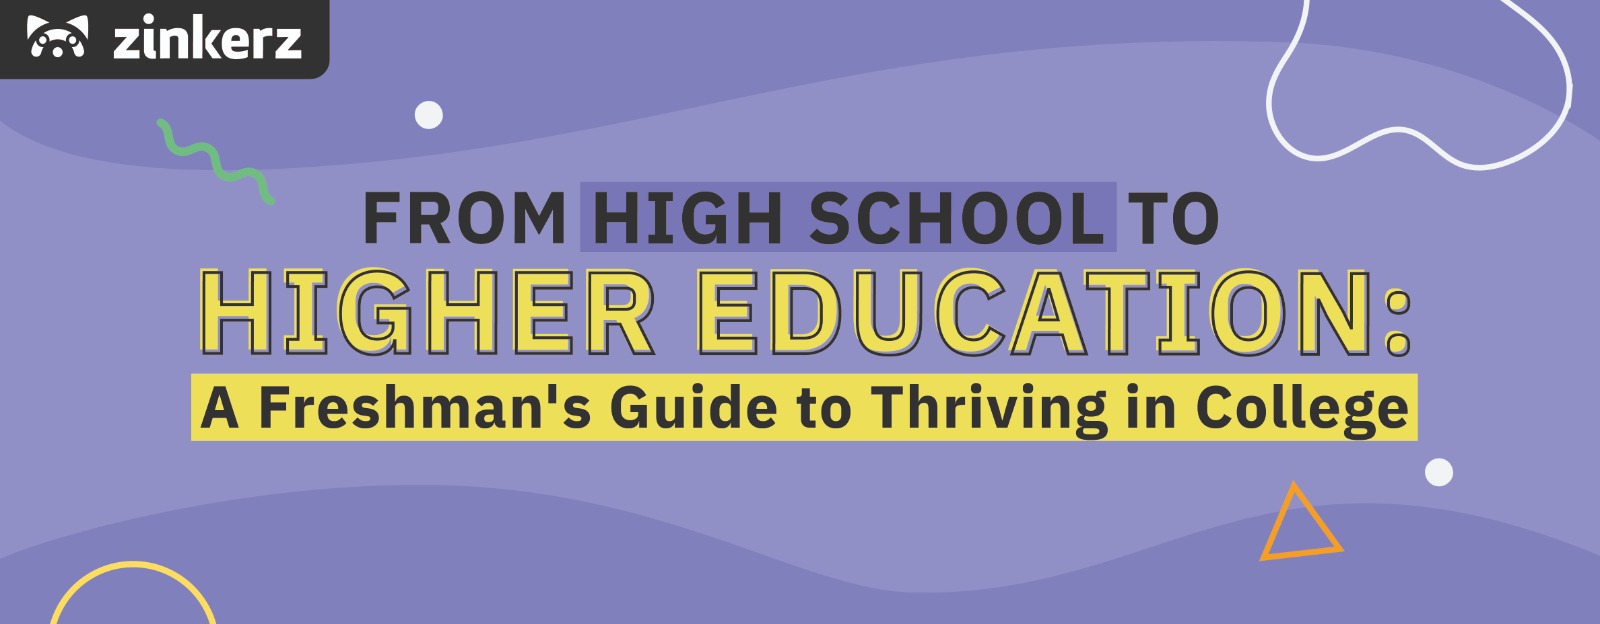 From High School to Higher Education: A Freshman’s Guide to Thriving in College